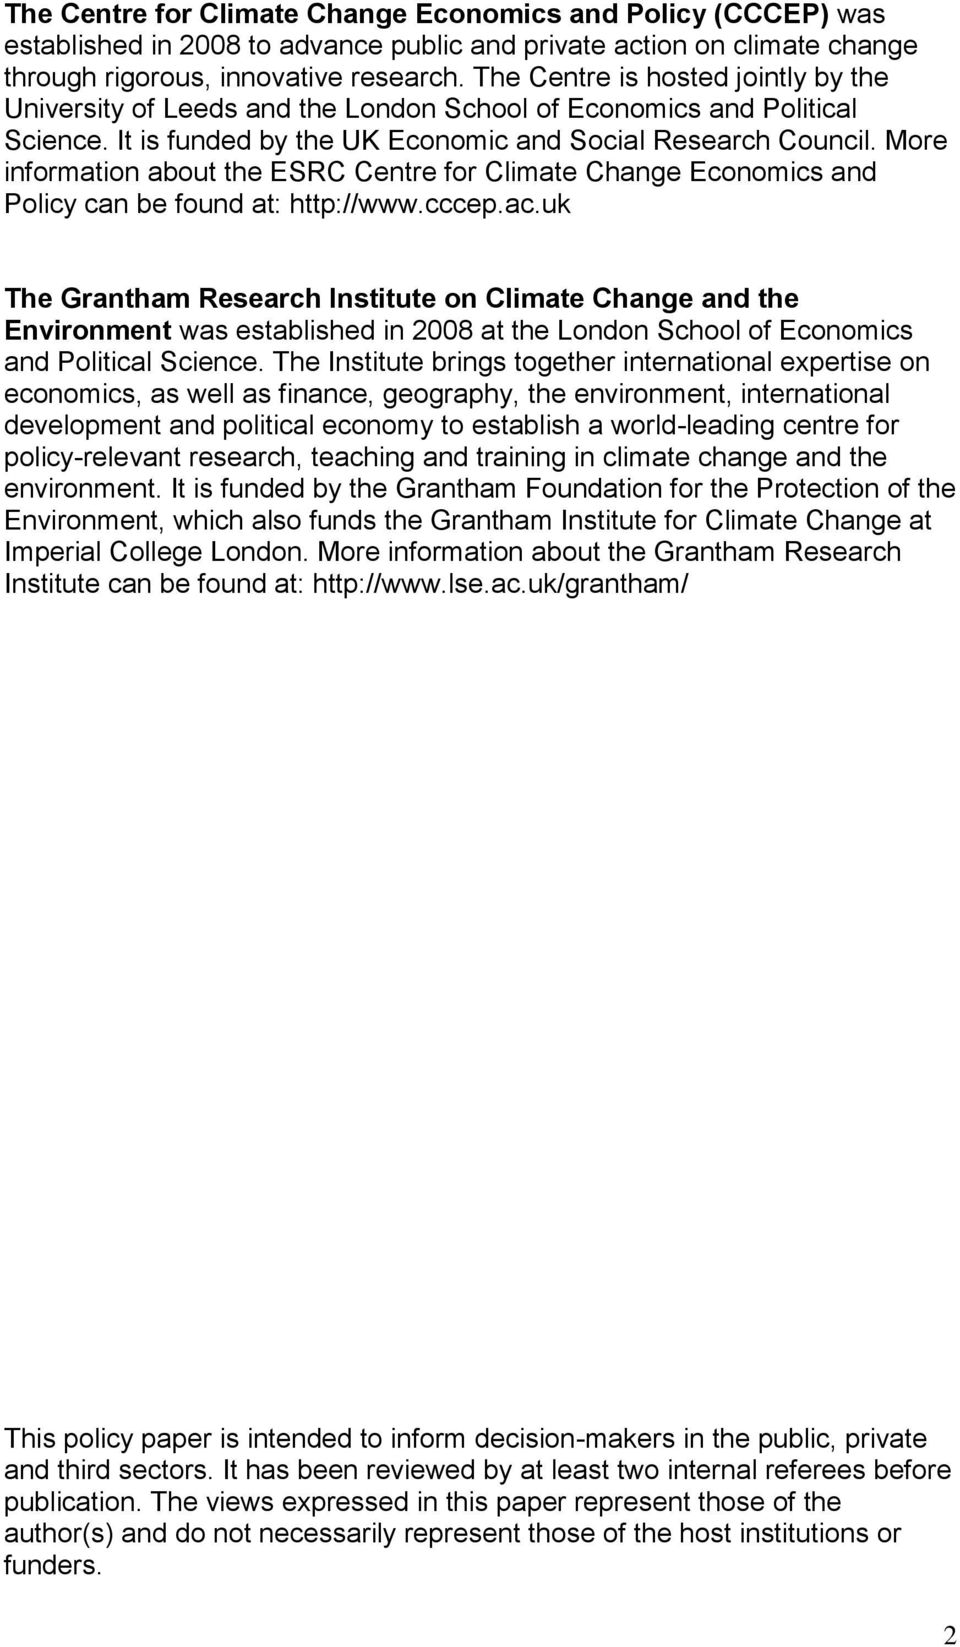 More information about the ESRC Centre for Climate Change Economics and Policy can be found at: http://www.cccep.ac.